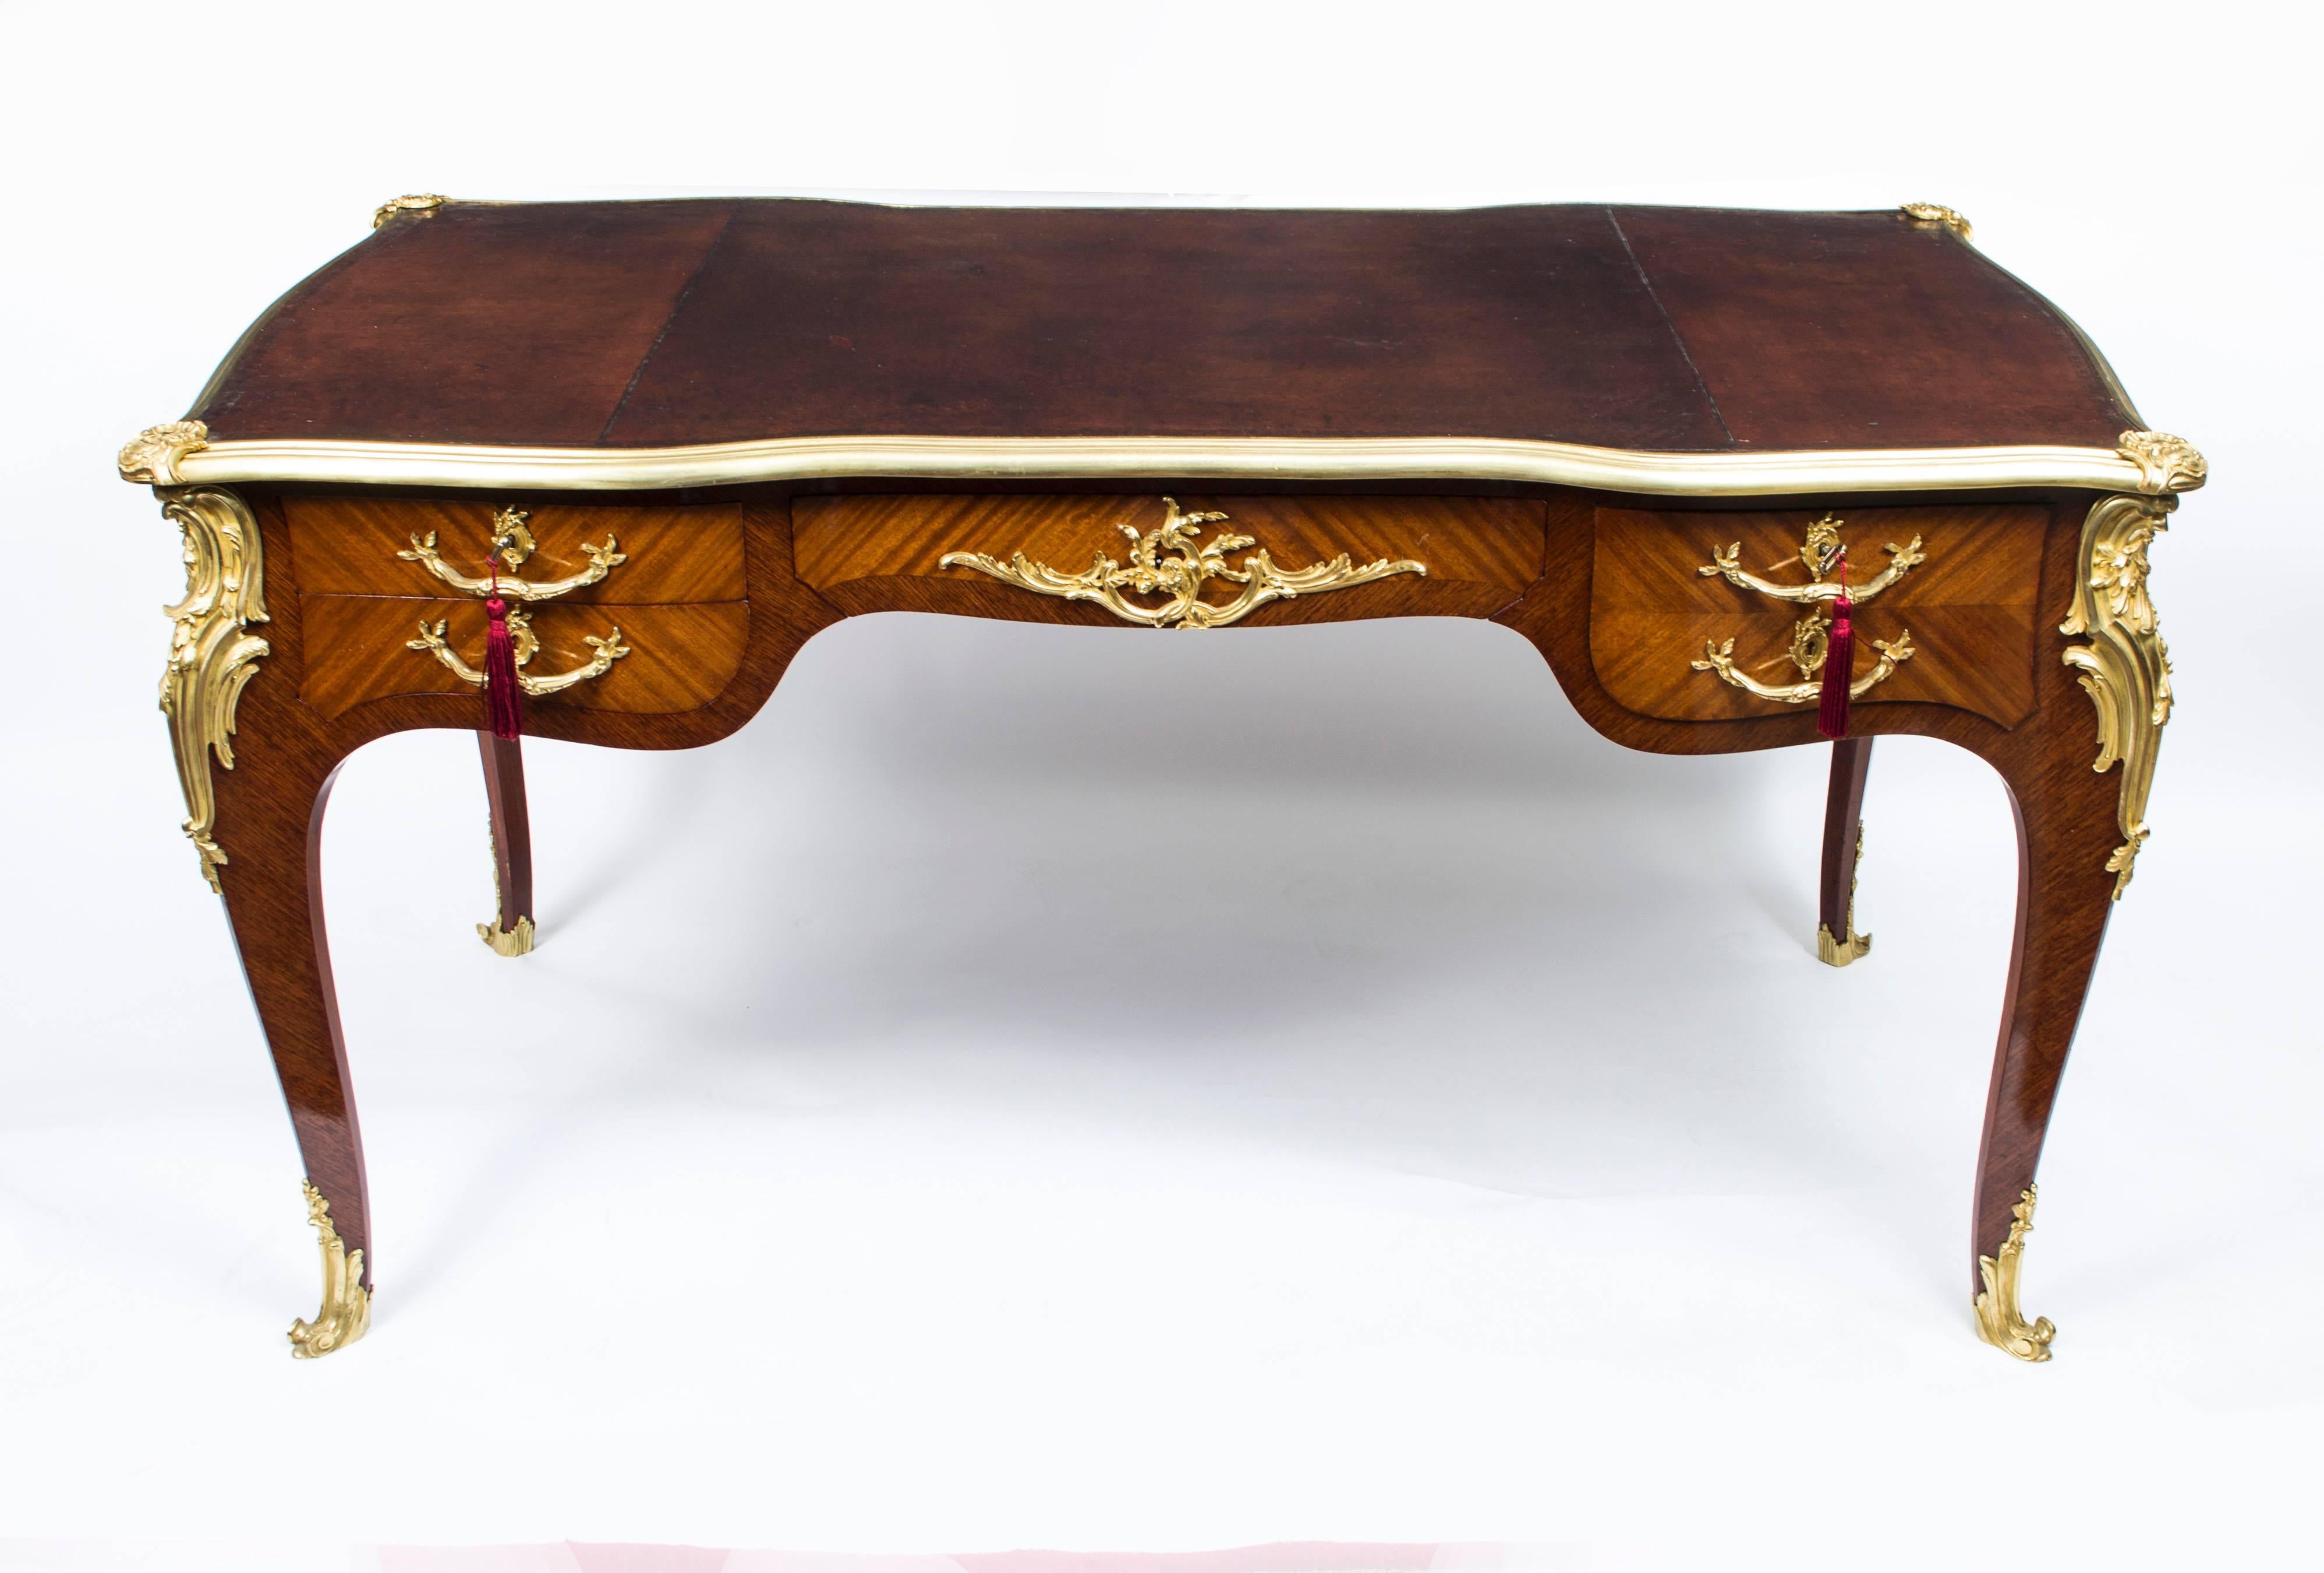 This is a gorgeous large antique French ormolu-mounted kingwood and flame mahogany bureau plat, circa 1870 in date.

Featuring fabulous decorative ormolu mounts this table is sure to get noticed wherever it is placed.

It has it's original inset